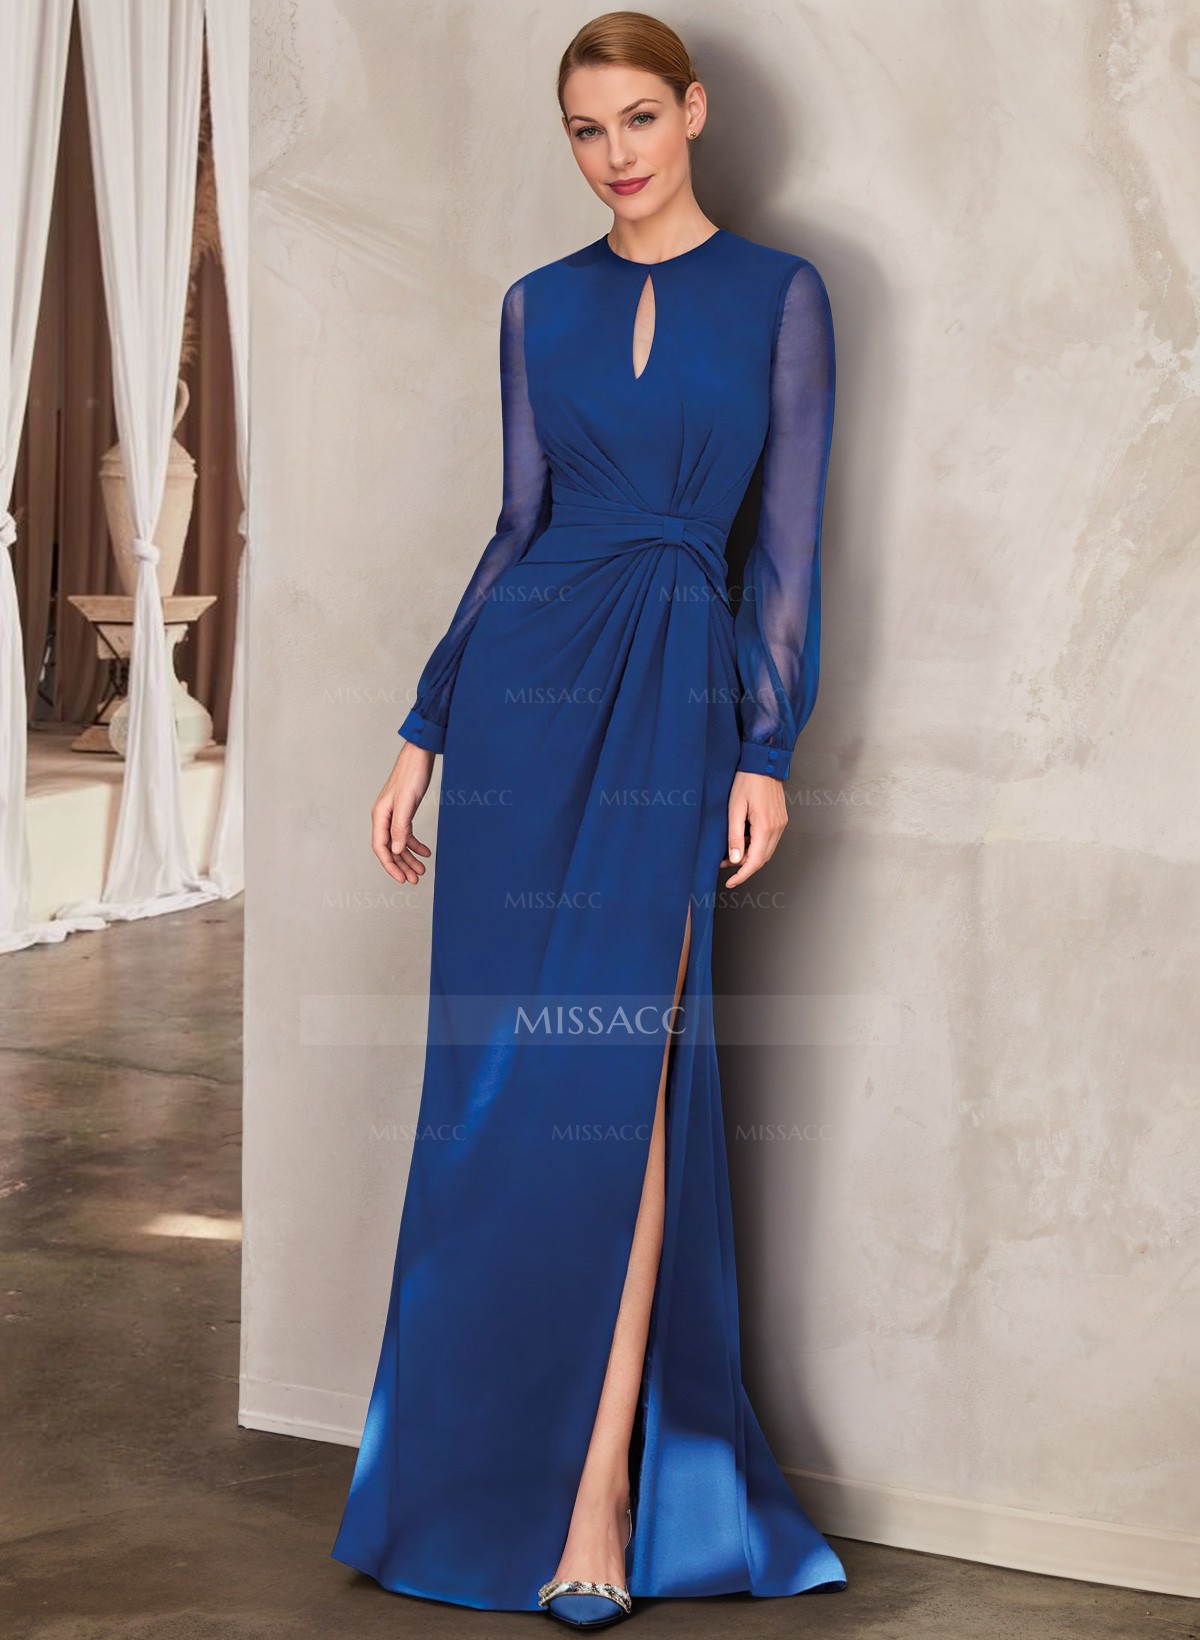 Sheath Scoop Neck Long Sleeves Floor-Length Chiffon Mother Of The Bride Dresses With Split Front